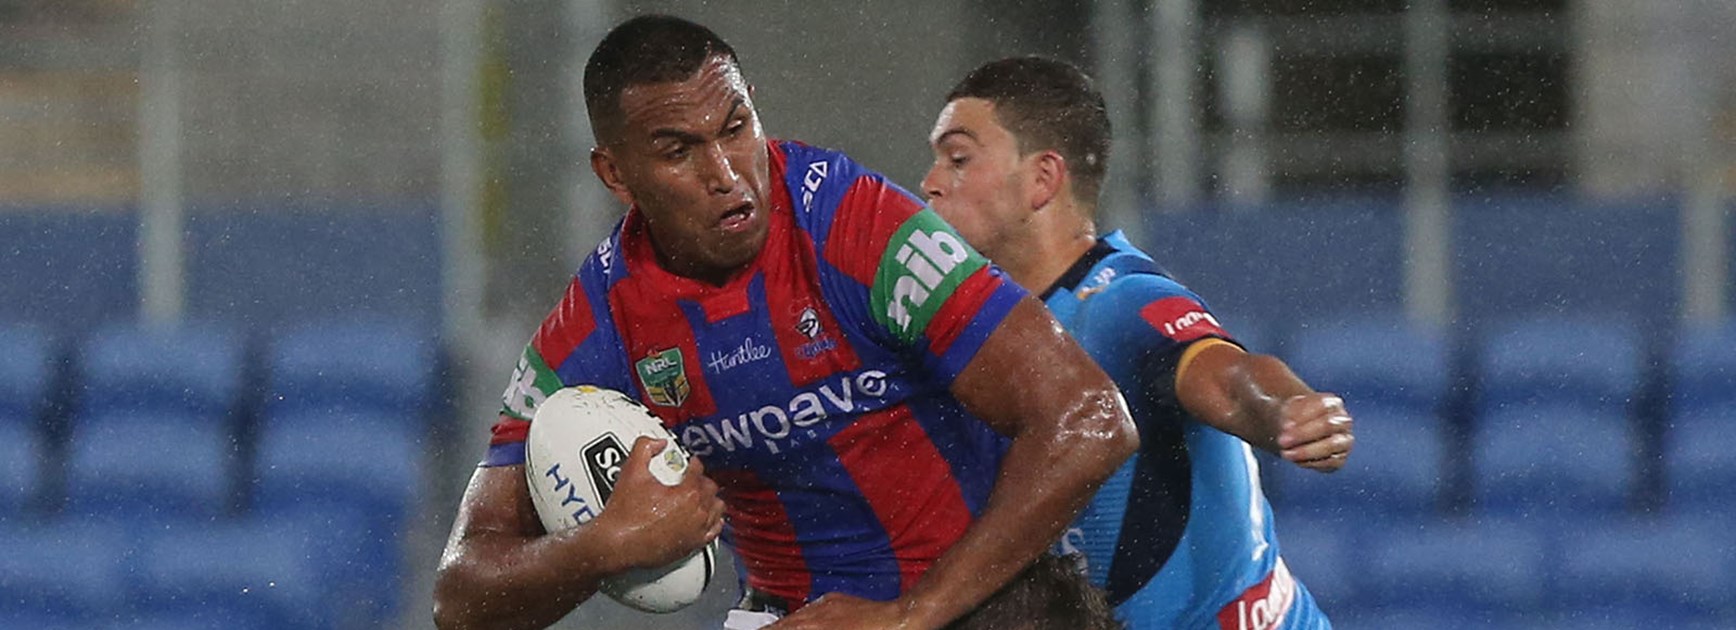 Jacob Saifiti made a good start to his NRL career despite his Knights losing to the Titans.